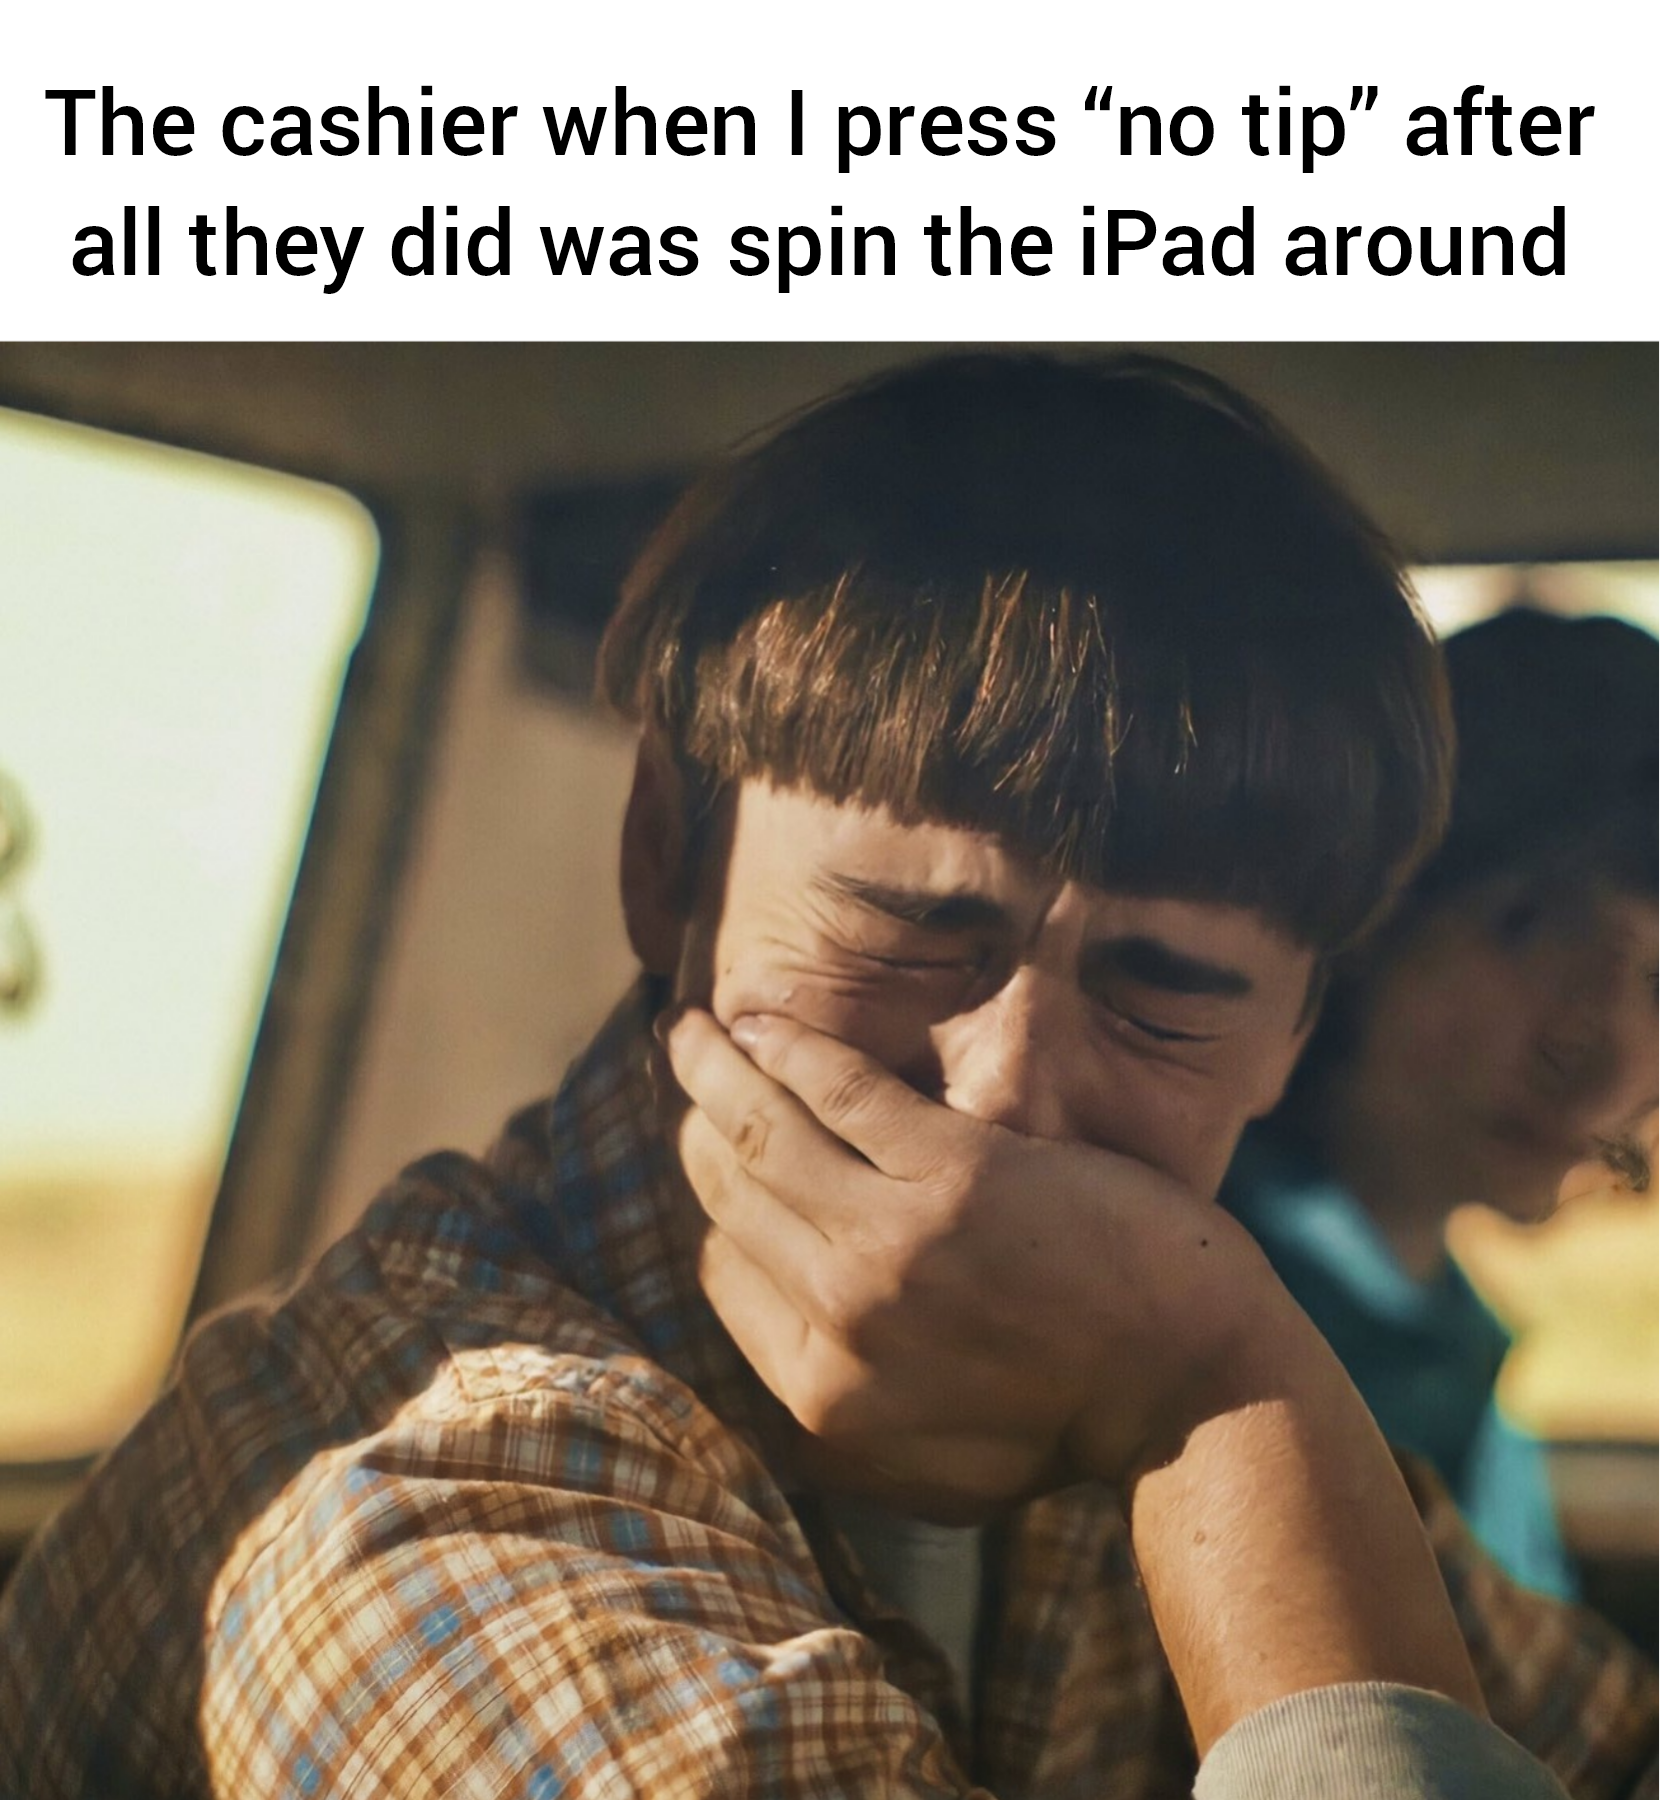 dank memes - funny memes - its 4am and mfs talking about the next move - The cashier when I press "no tip" after all they did was spin the iPad around